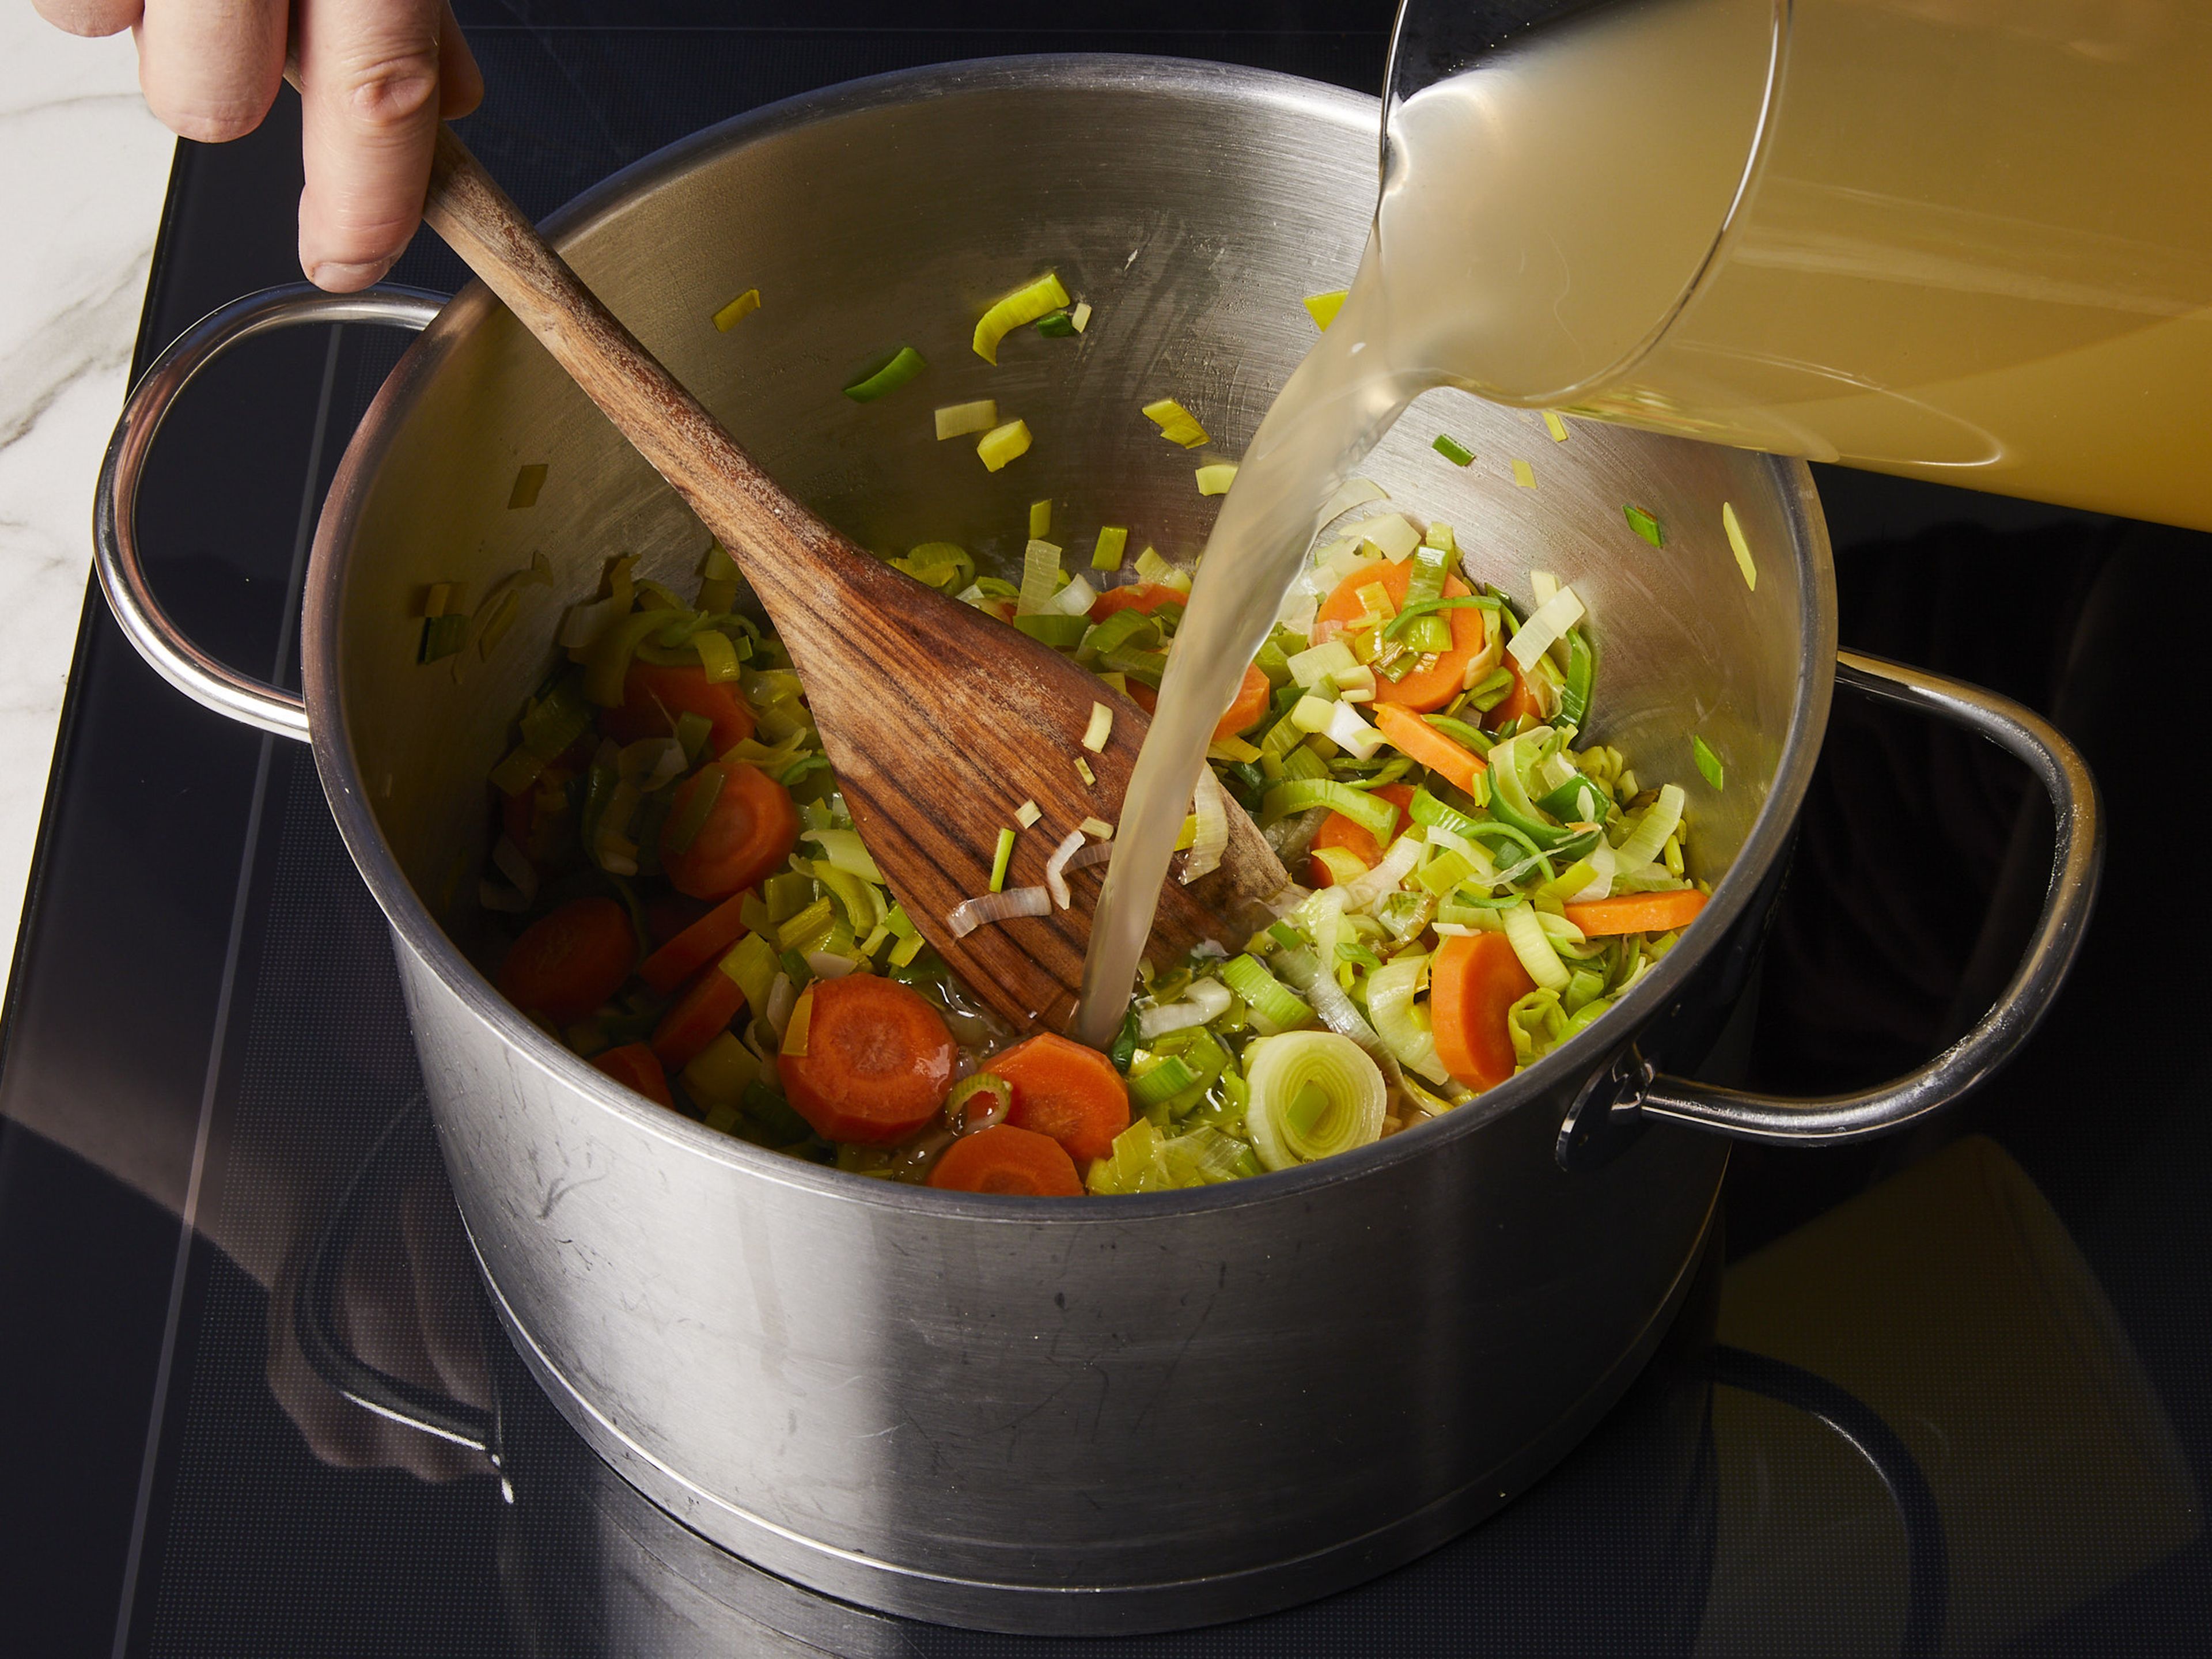 In a large pot, sauté leeks and carrot in butter for approx. 1–2 min. until the leeks are translucent and reduced in volume by half. Add potatoes and fish stock. Season with salt and pepper. Let it simmer over medium heat for approx. 10 min. until the potatoes are cooked through.